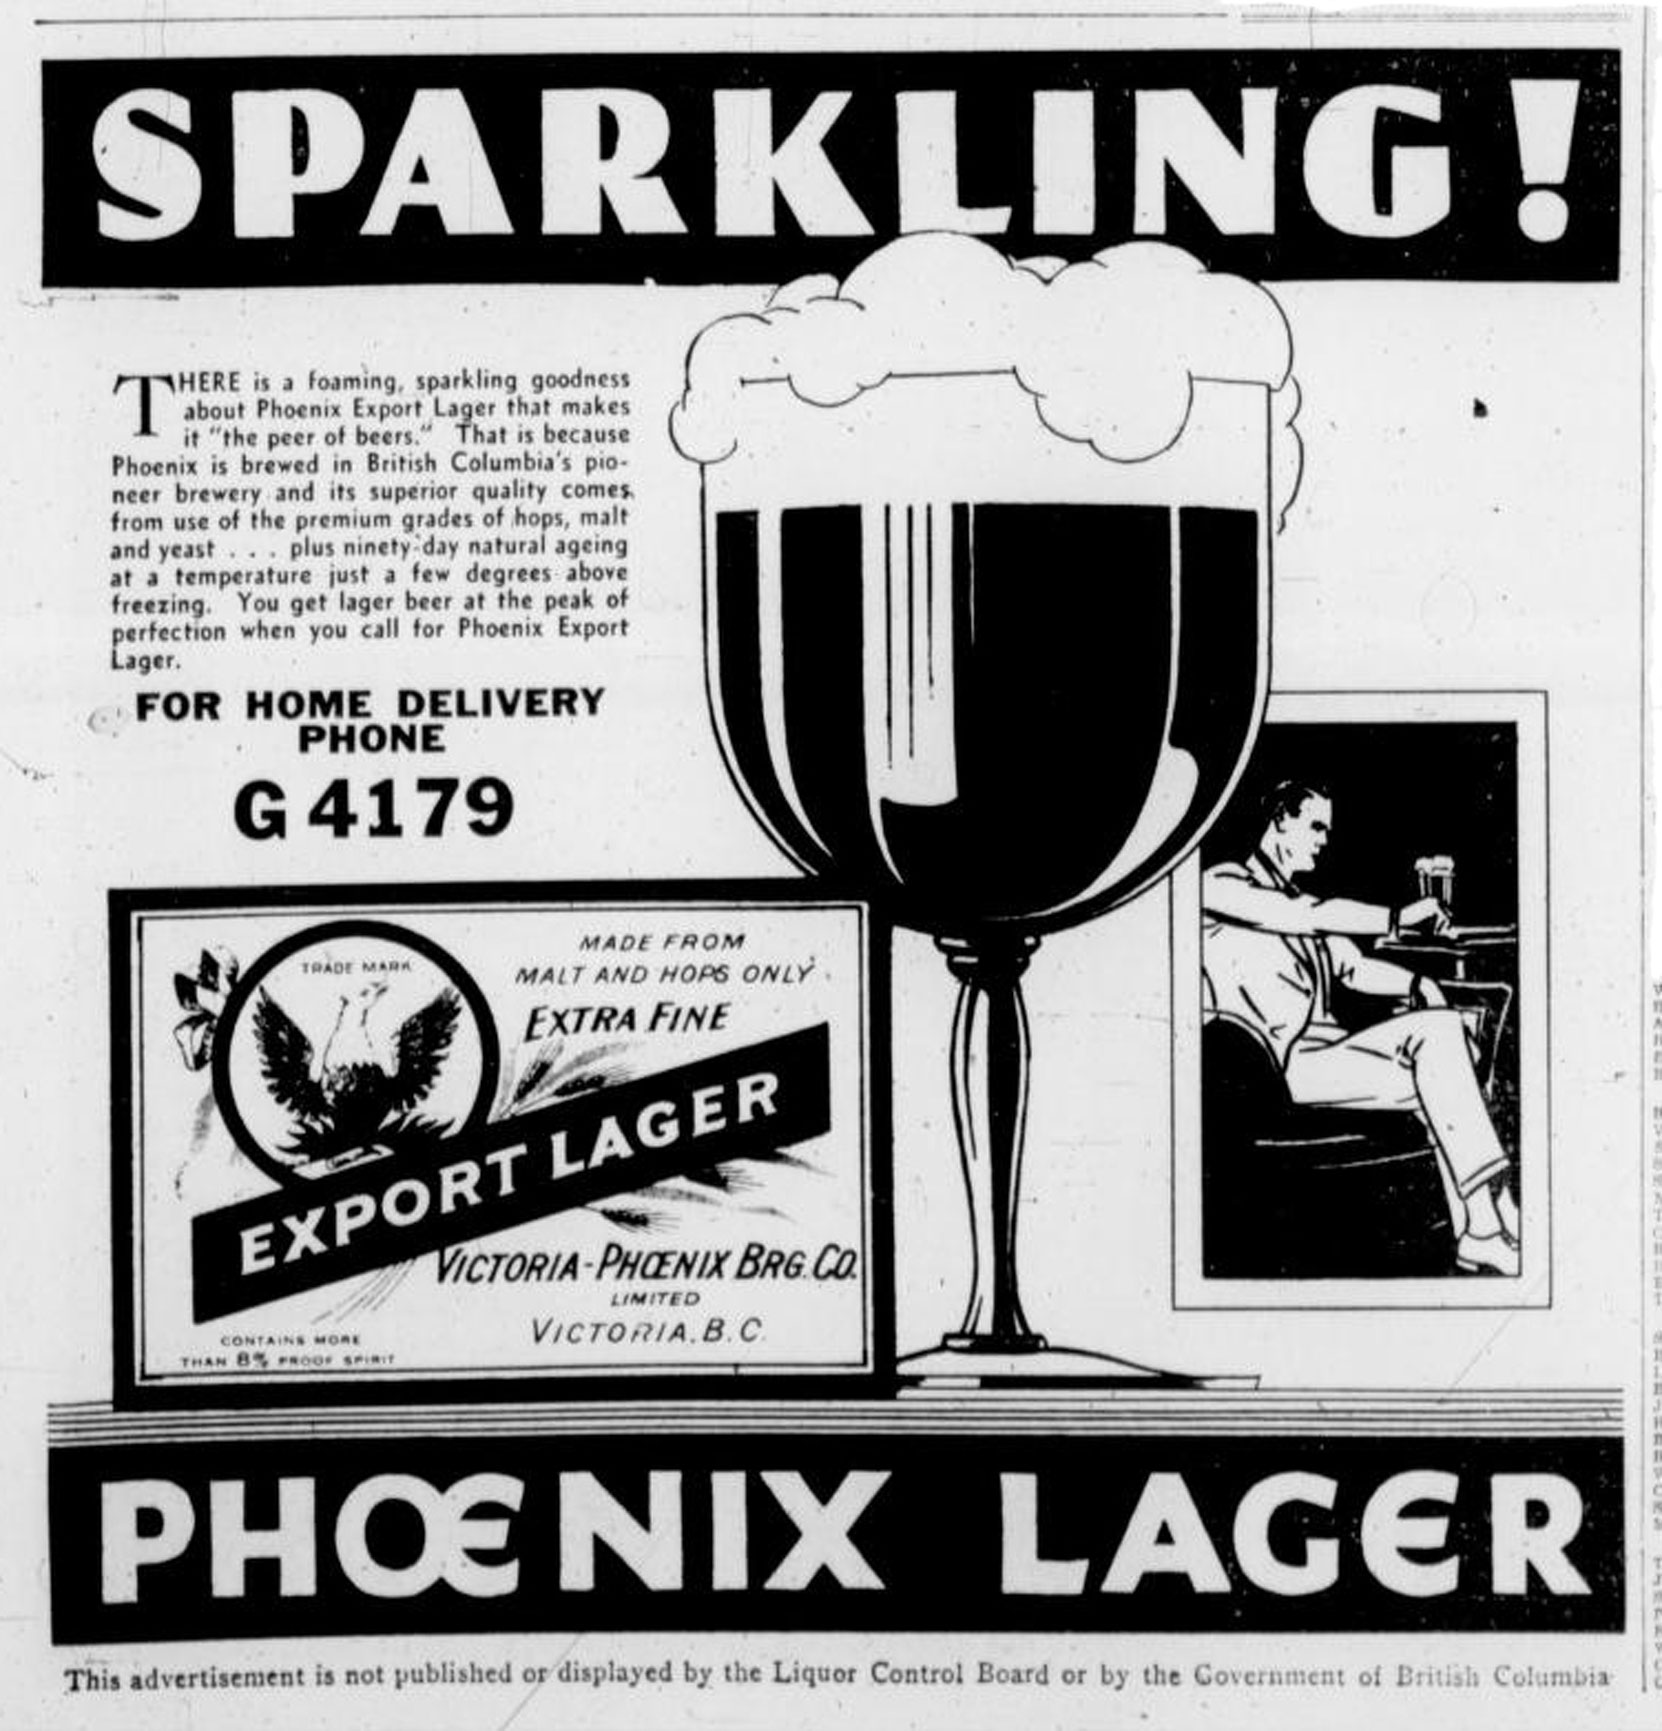 1939 advertisement for Phoenix Lager, brewed by the Victoria Phoenix brewing Company at 1921 Government Street (Victoria Online Sightseeing Tours collection)